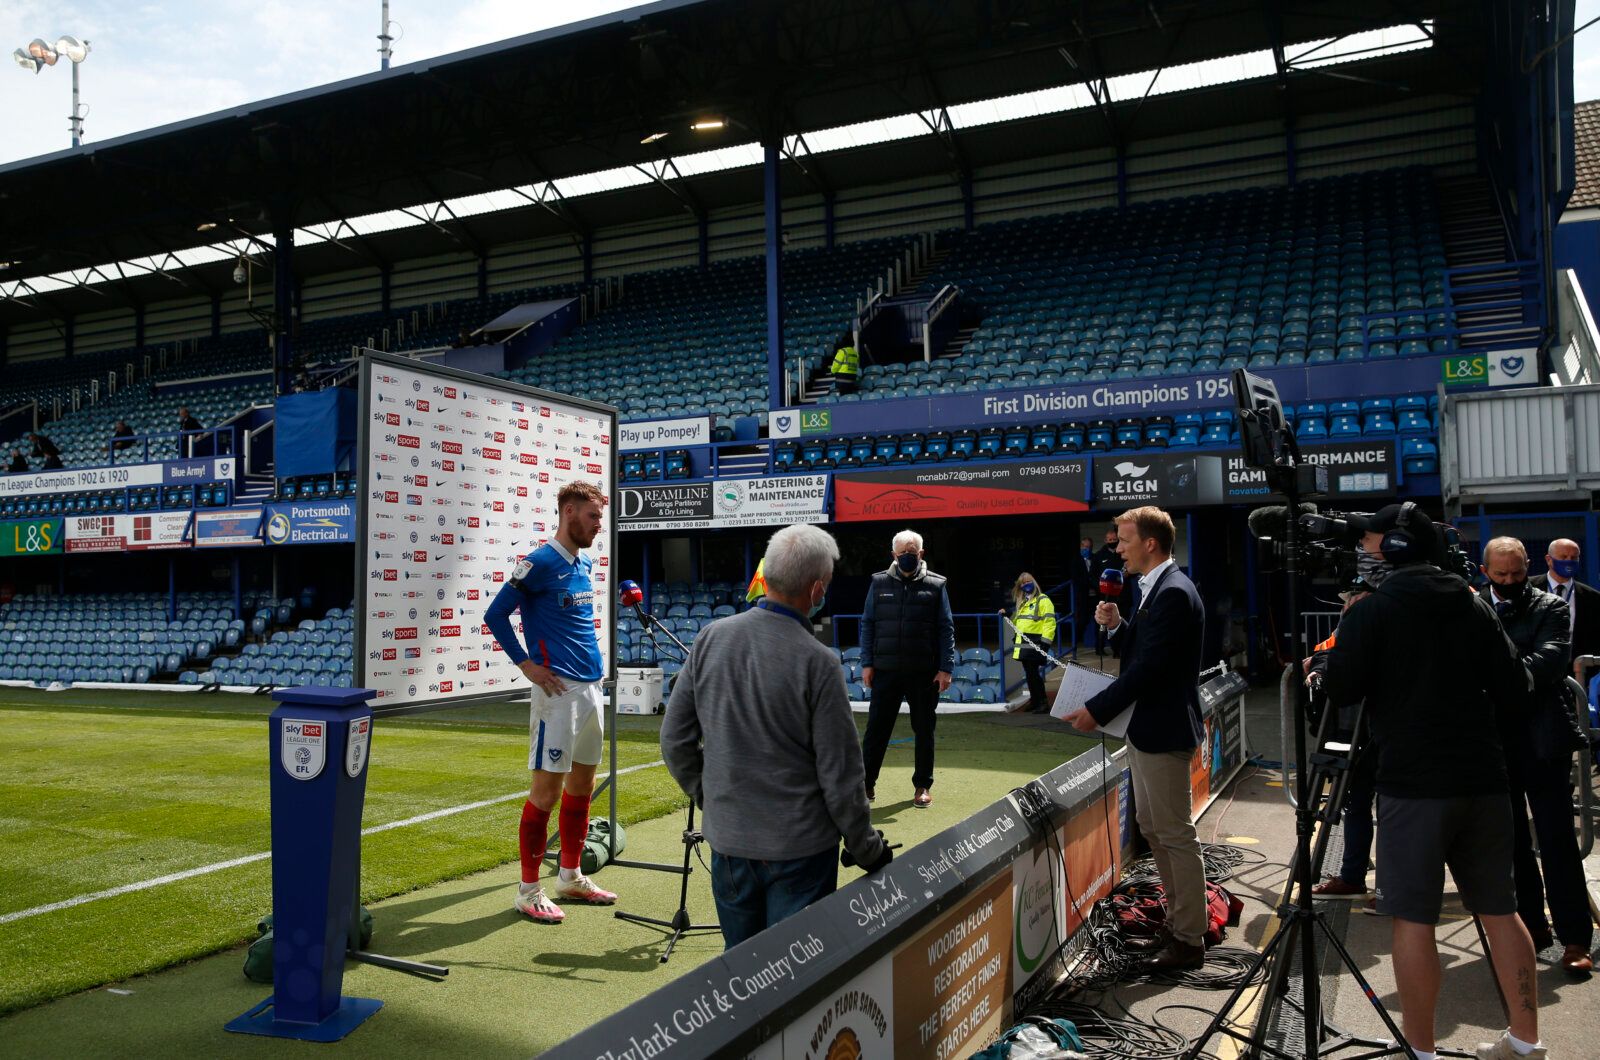 Soccer Football - League One - Portsmouth v Accrington Stanley - Fratton Park, Portsmouth, Britain - May 9, 2021 Portsmouth's Tom Naylor speaks to Sky Sports after the match Action Images/Andrew Boyers EDITORIAL USE ONLY. No use with unauthorized audio, video, data, fixture lists, club/league logos or 'live' services. Online in-match use limited to 75 images, no video emulation. No use in betting, games or single club /league/player publications.  Please contact your account representative for f